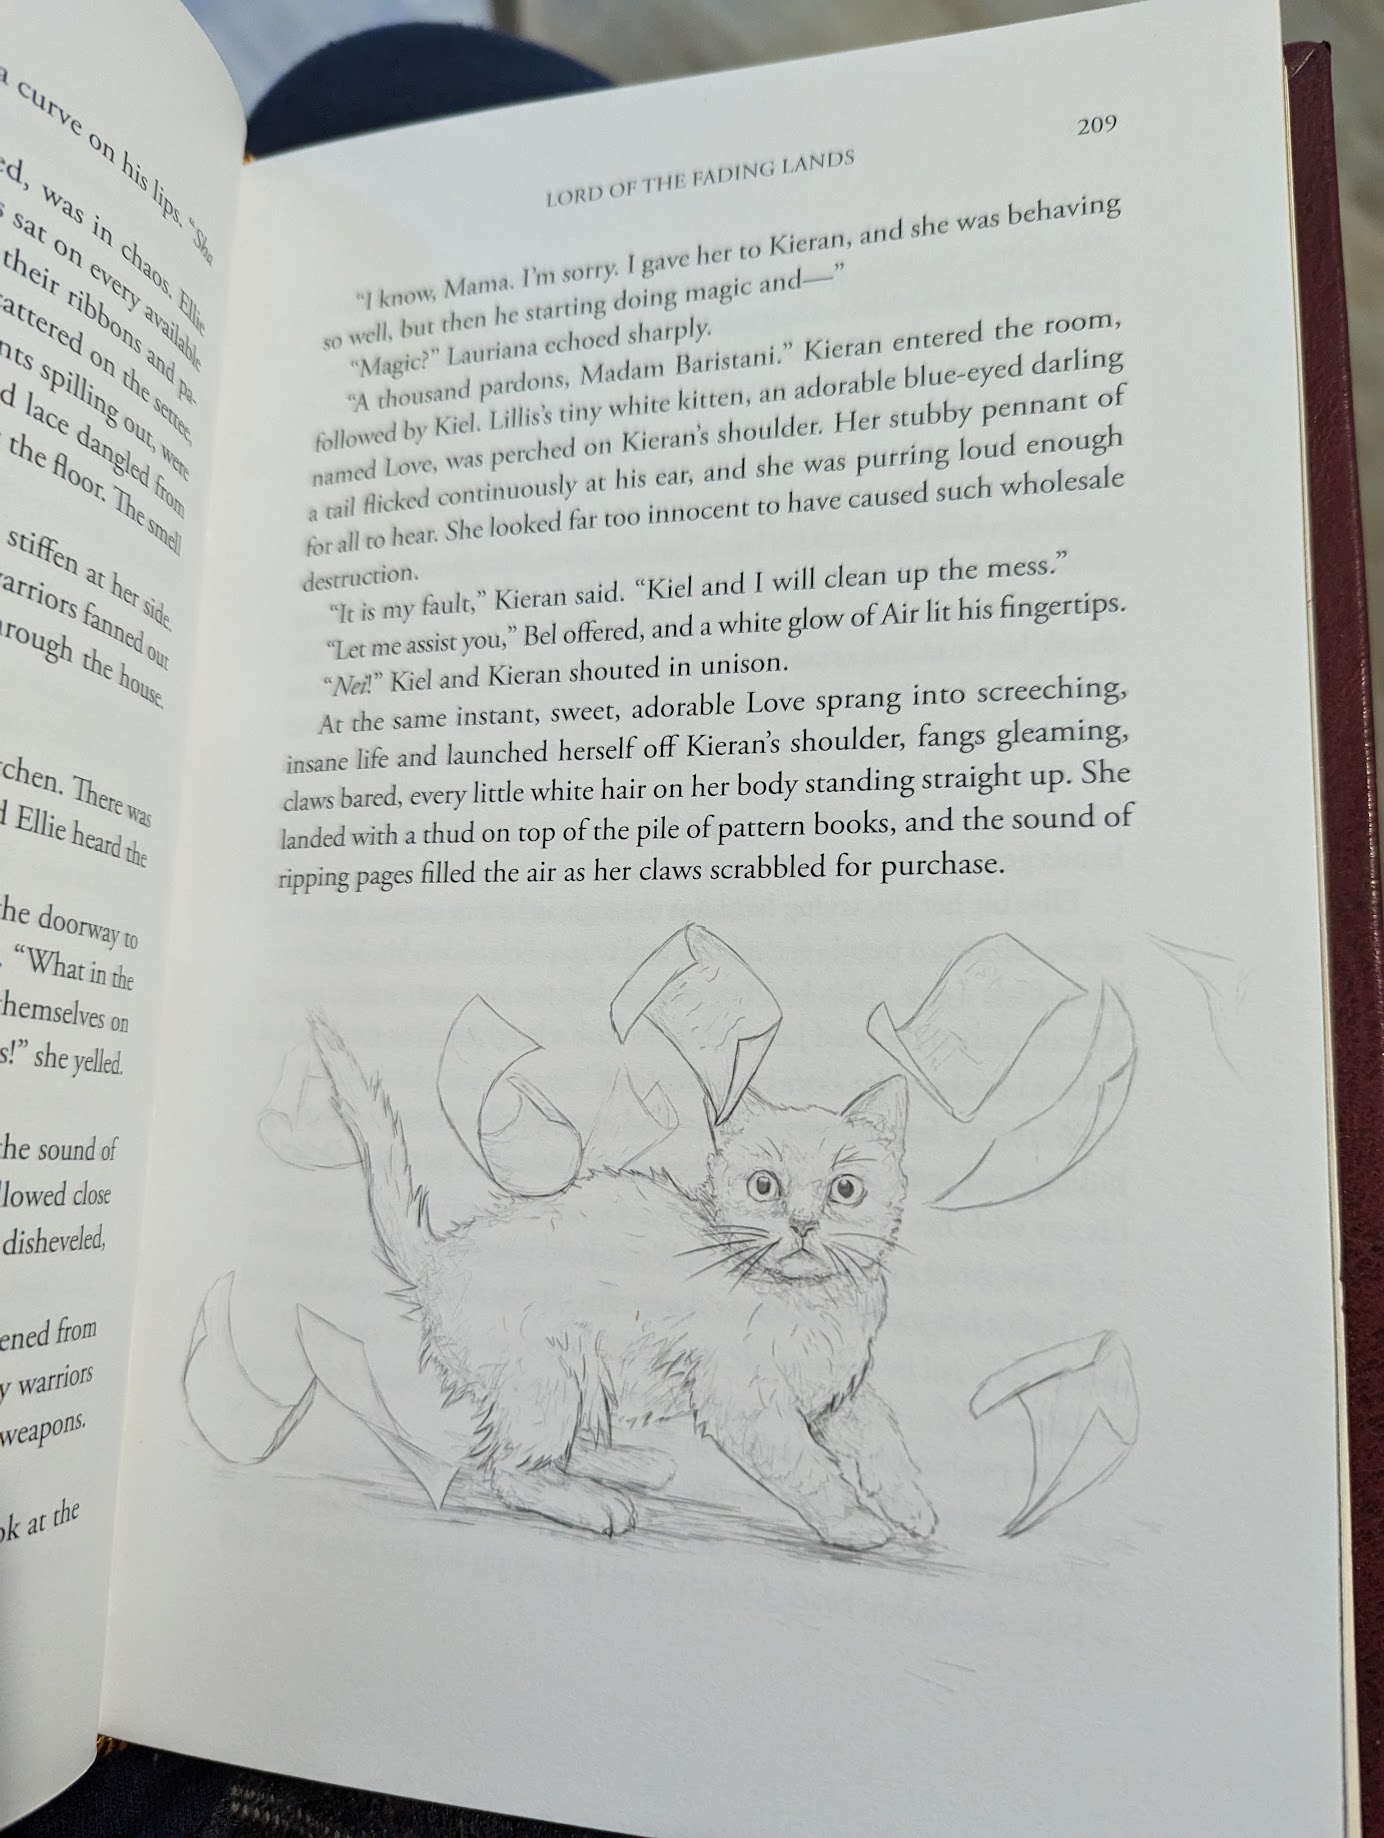 Photo of the interior page of a book. At the end of the page is a rough  sketch of a cat looking alarmed. There are papers flying all around it, as if the cat had just disrupted them in their fright.